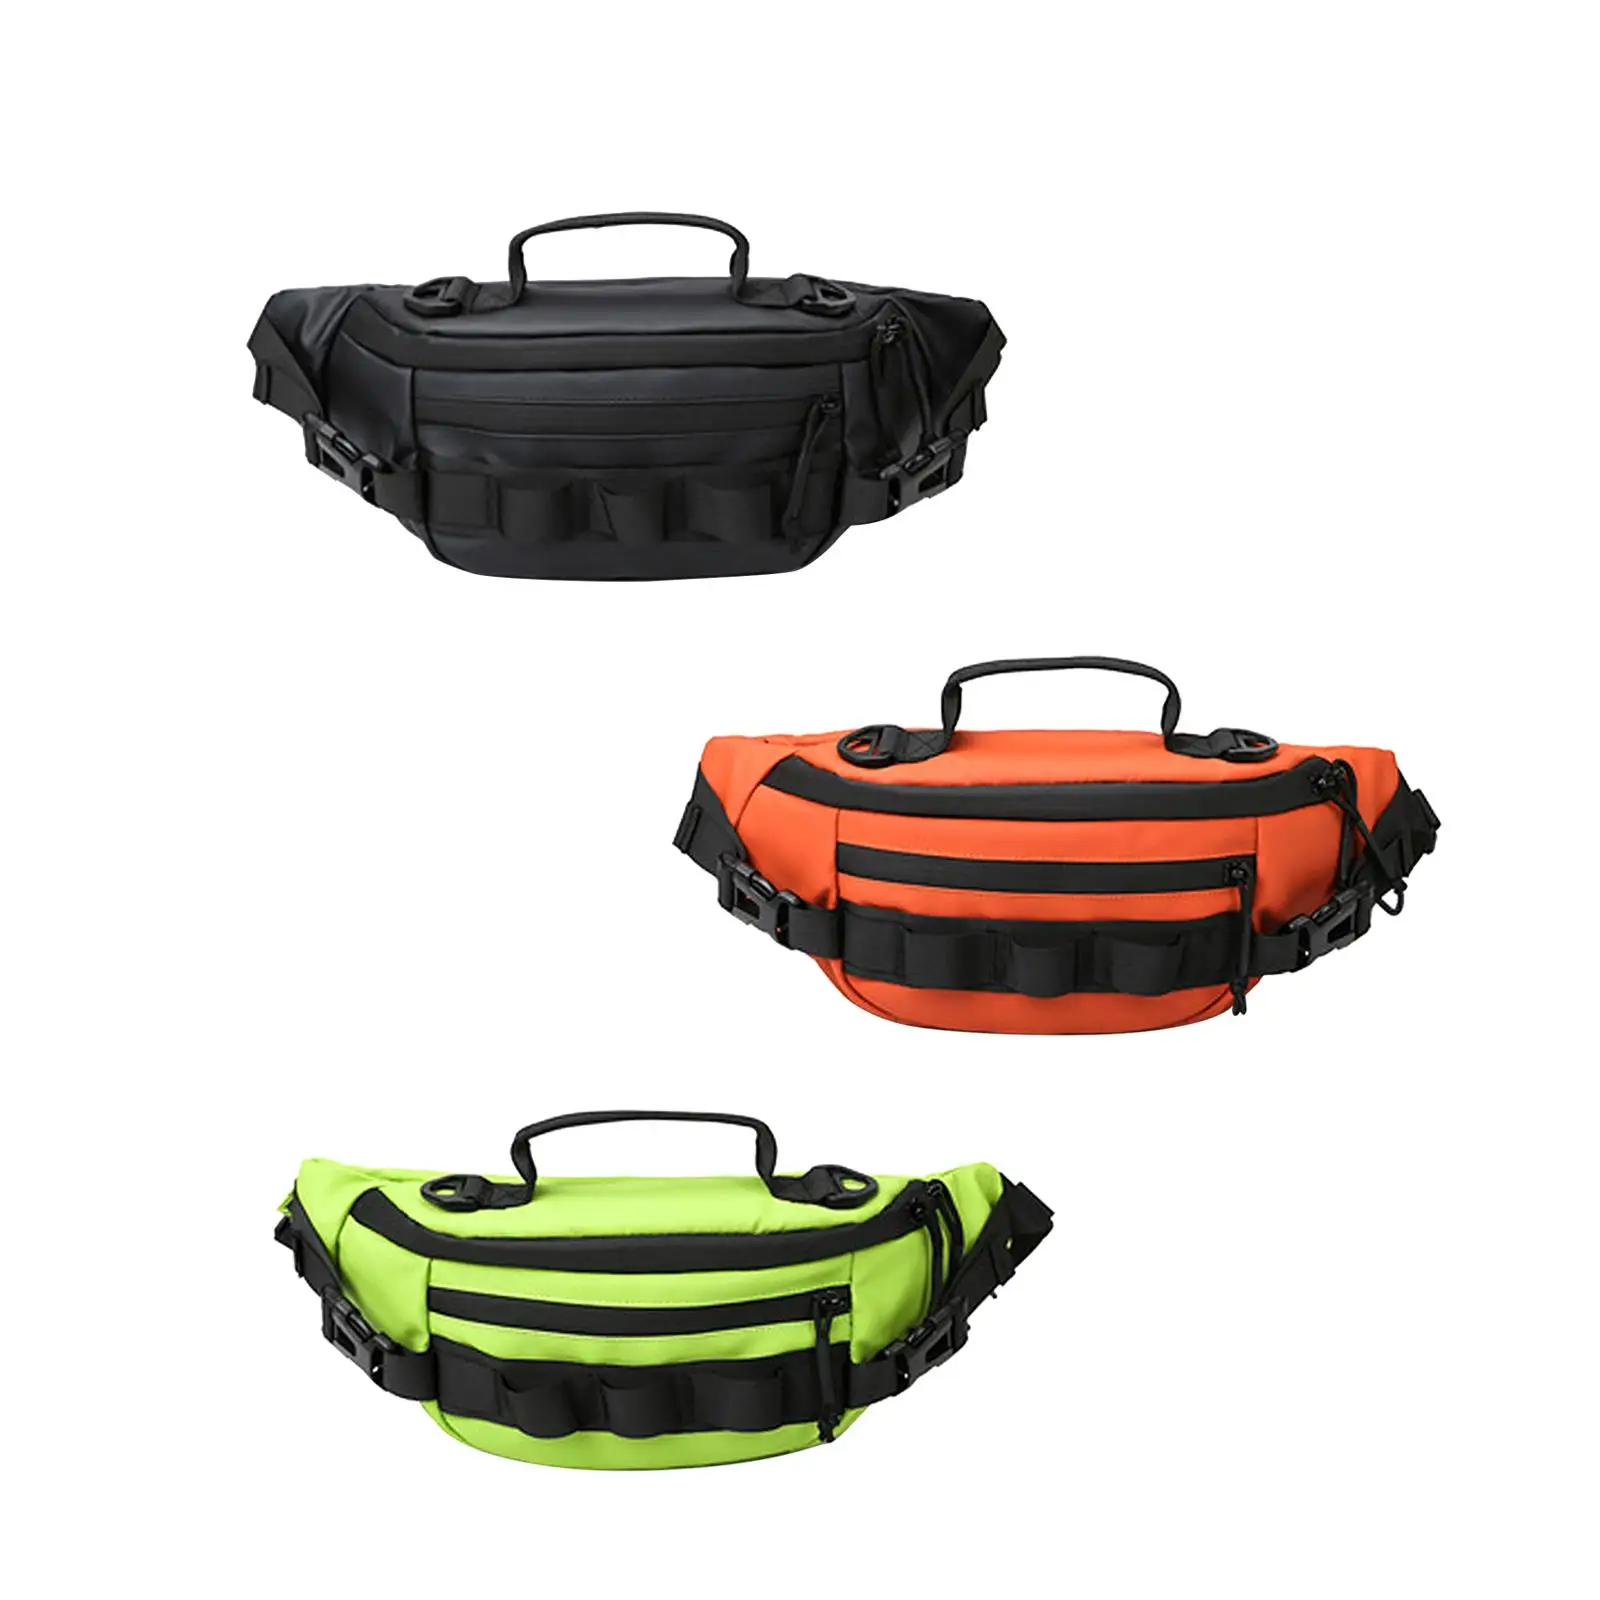 Waist Bag Pack Hip Bag Equipment Lightweight Casual Fishing Tackle Bag Lure Fishing Bag for Sports Hiking Outdoor Camping Men